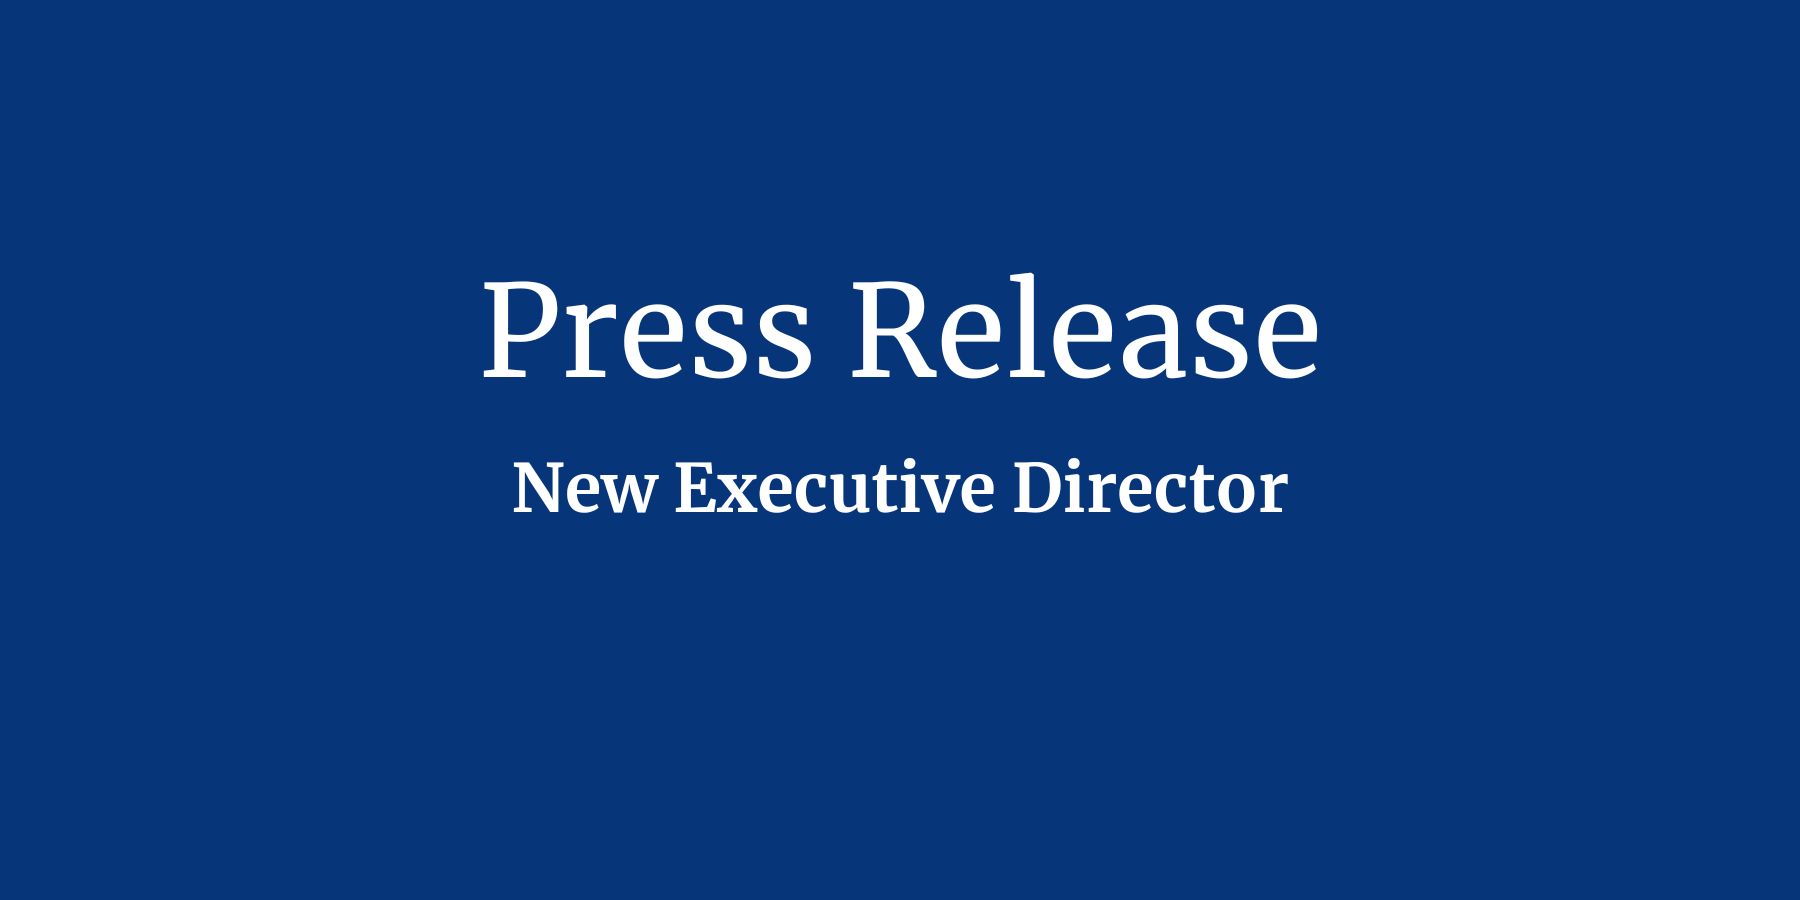 Text on blue background that reads: "Press Release: New Executive Director"